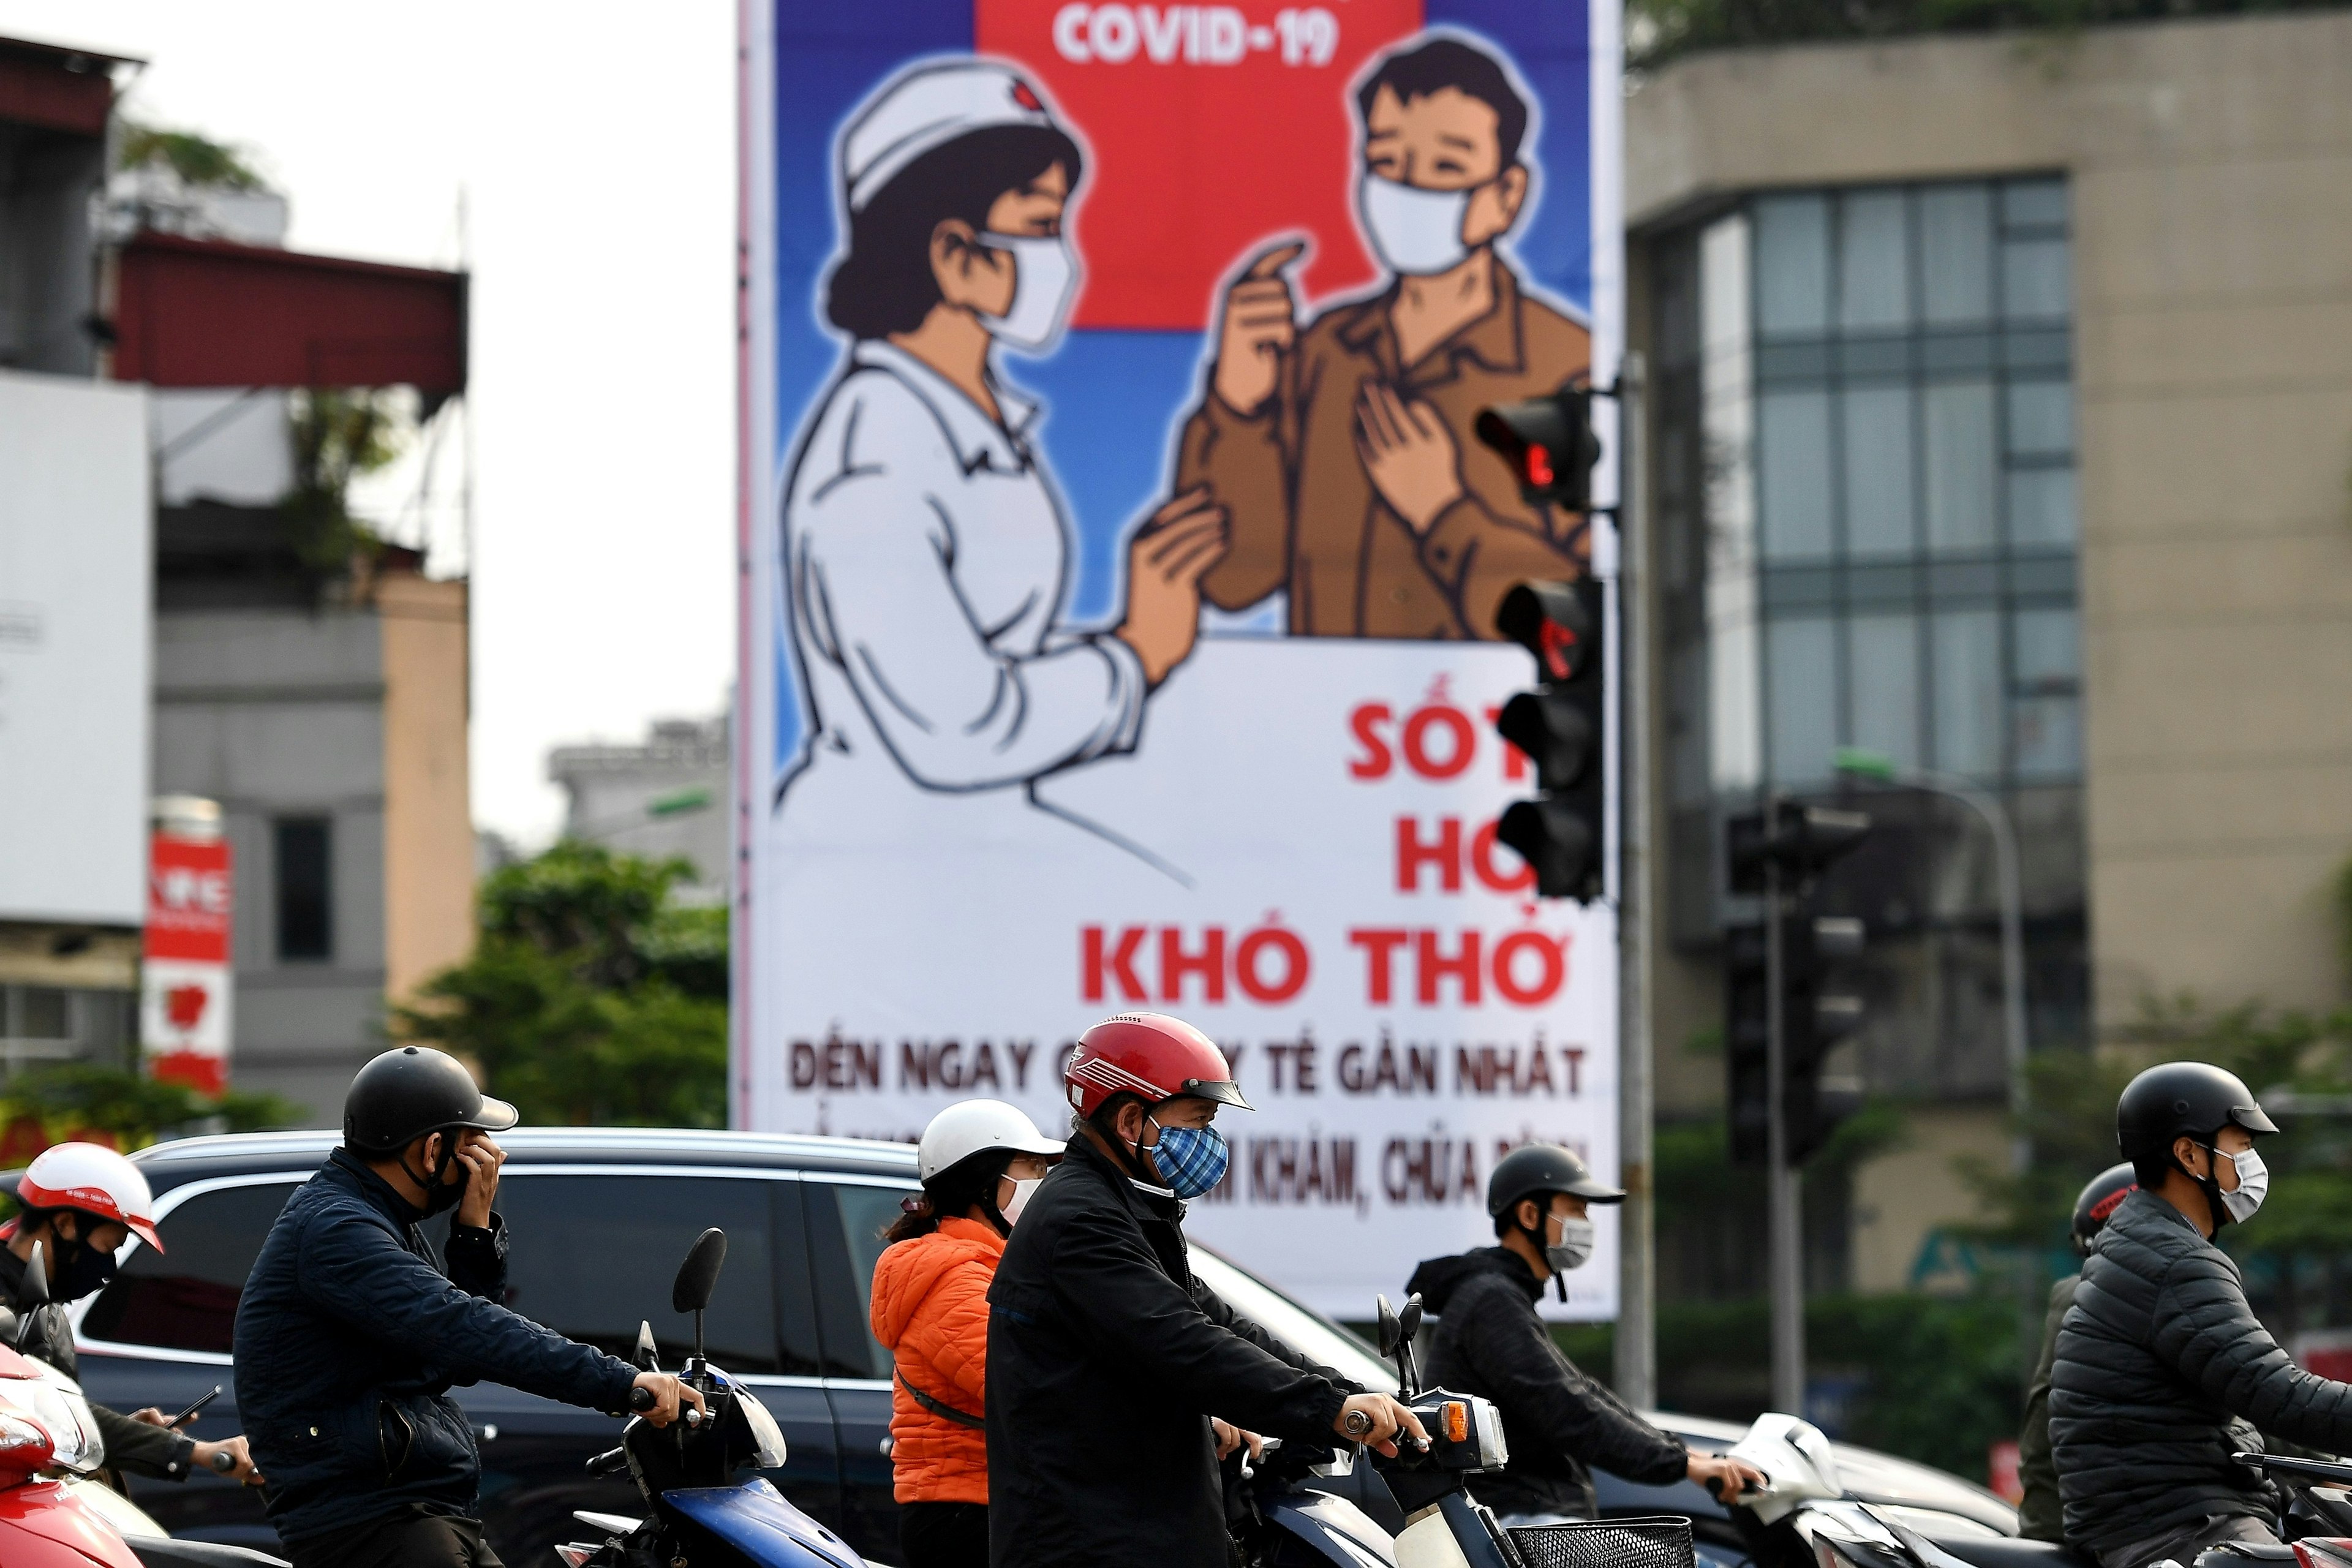 Motorists wearing face masks wait at a traffic light amid Vietnam's nationwide social isolation effort as a preventive measure against the spread of COVID-19 coronavirus in Hanoi on April 6, 2020. (Photo by Nhac NGUYEN / AFP) (Photo by NHAC NGUYEN/AFP via Getty Images)